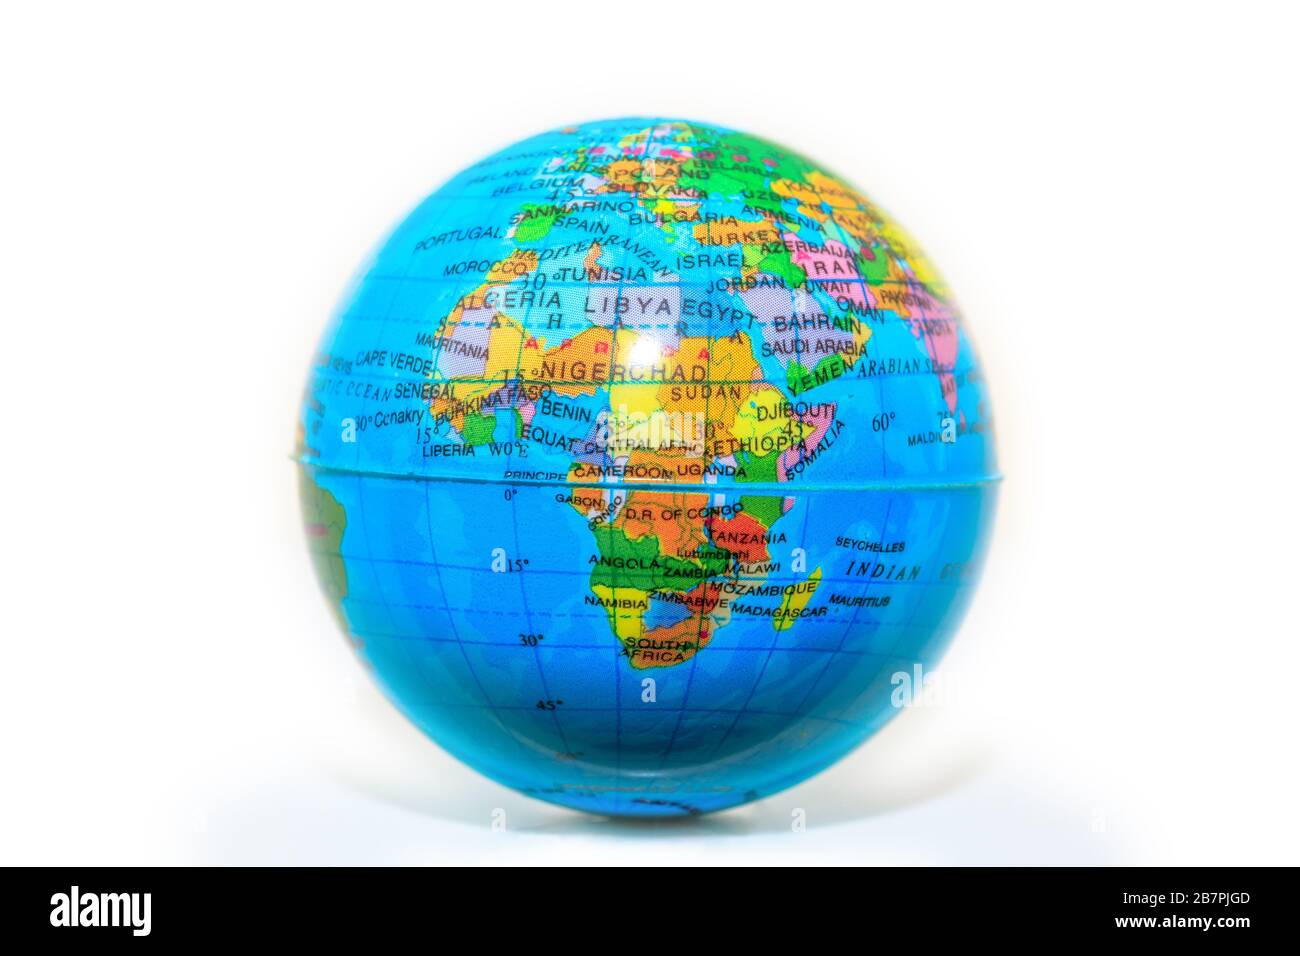 world globe isolated on white background. European and African face of the planet earth. Stock Photo